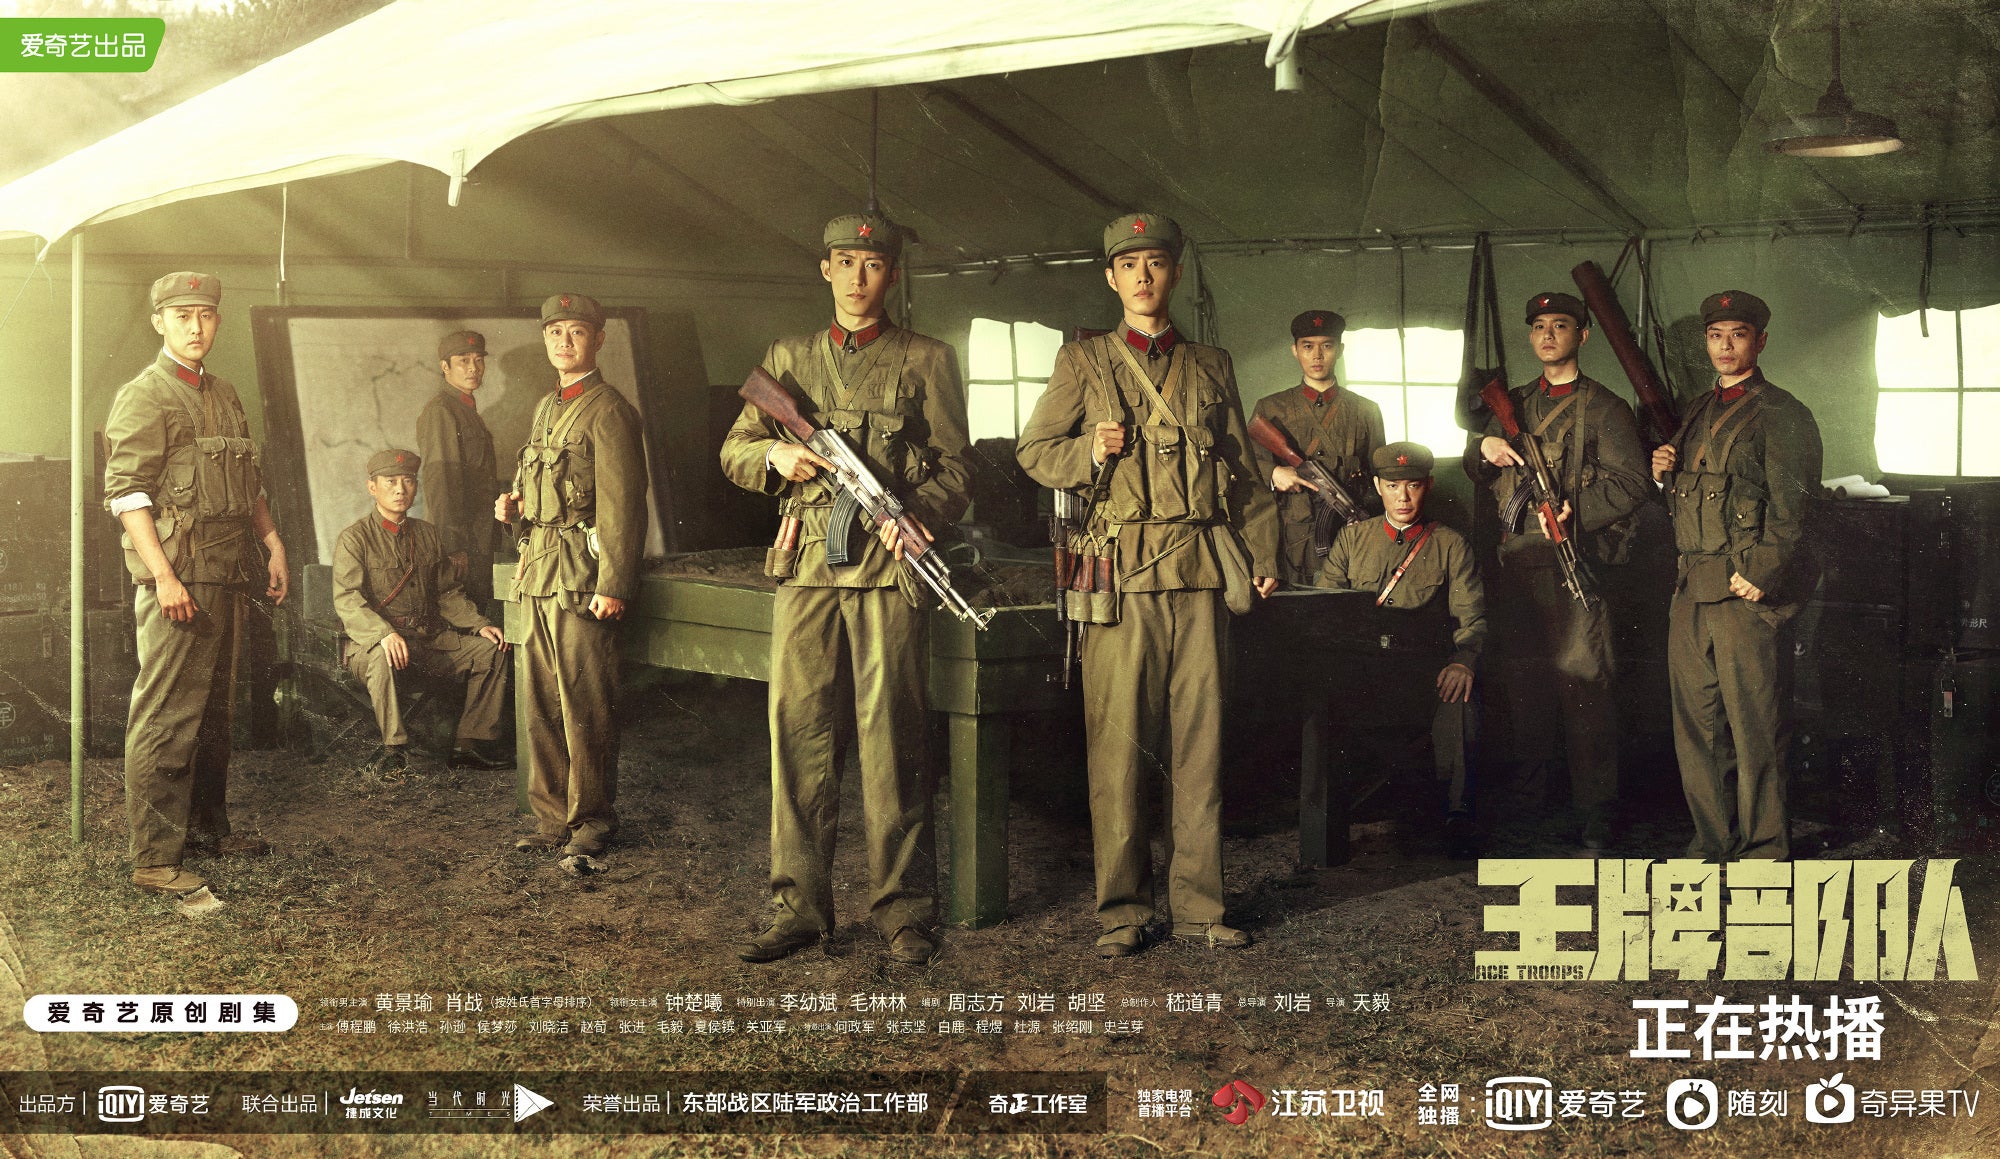 TV ratings for Ace Troops (王牌部队) in Japan. iQiyi TV series